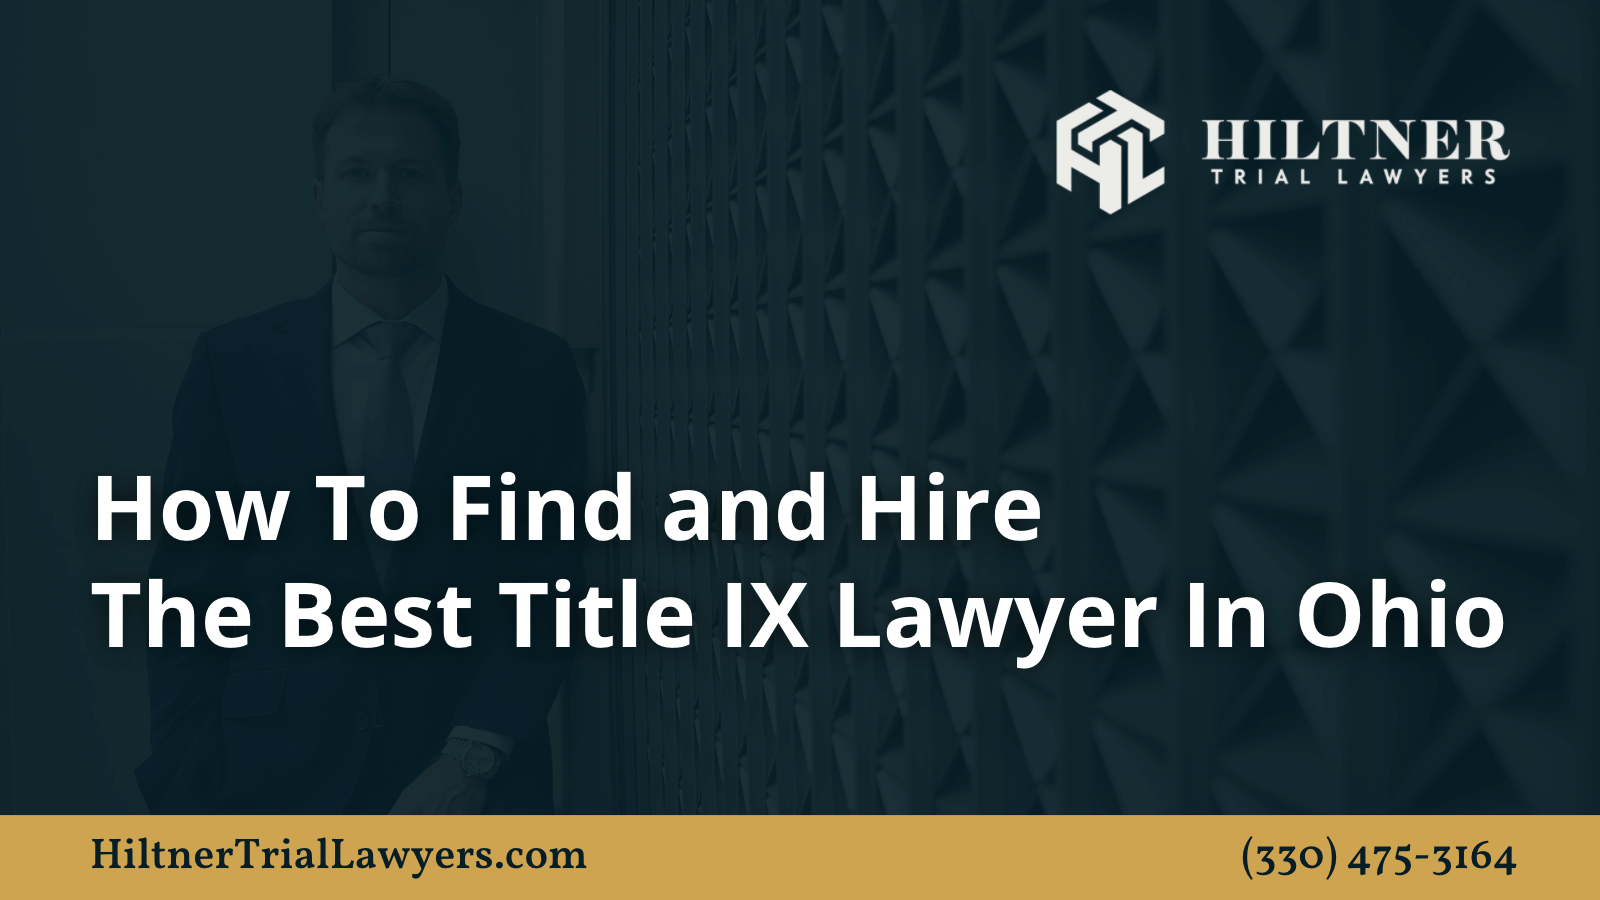 Best Title IX Lawyer In Ohio - Hiltner Trial Lawyers Ohio - max hiltner